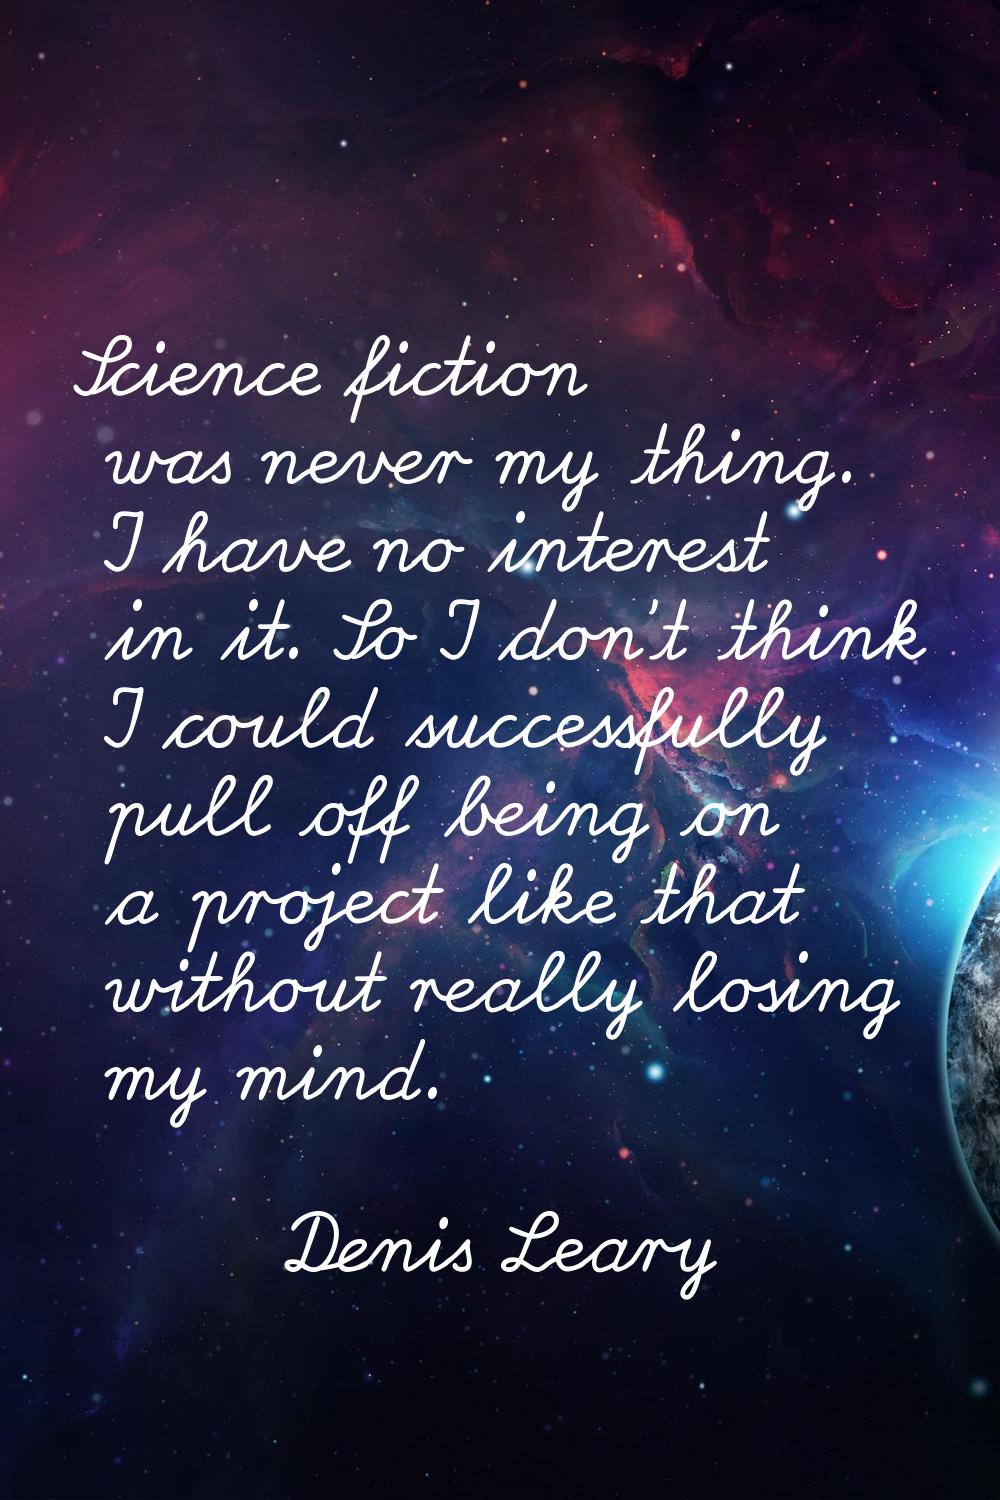 Science fiction was never my thing. I have no interest in it. So I don't think I could successfully